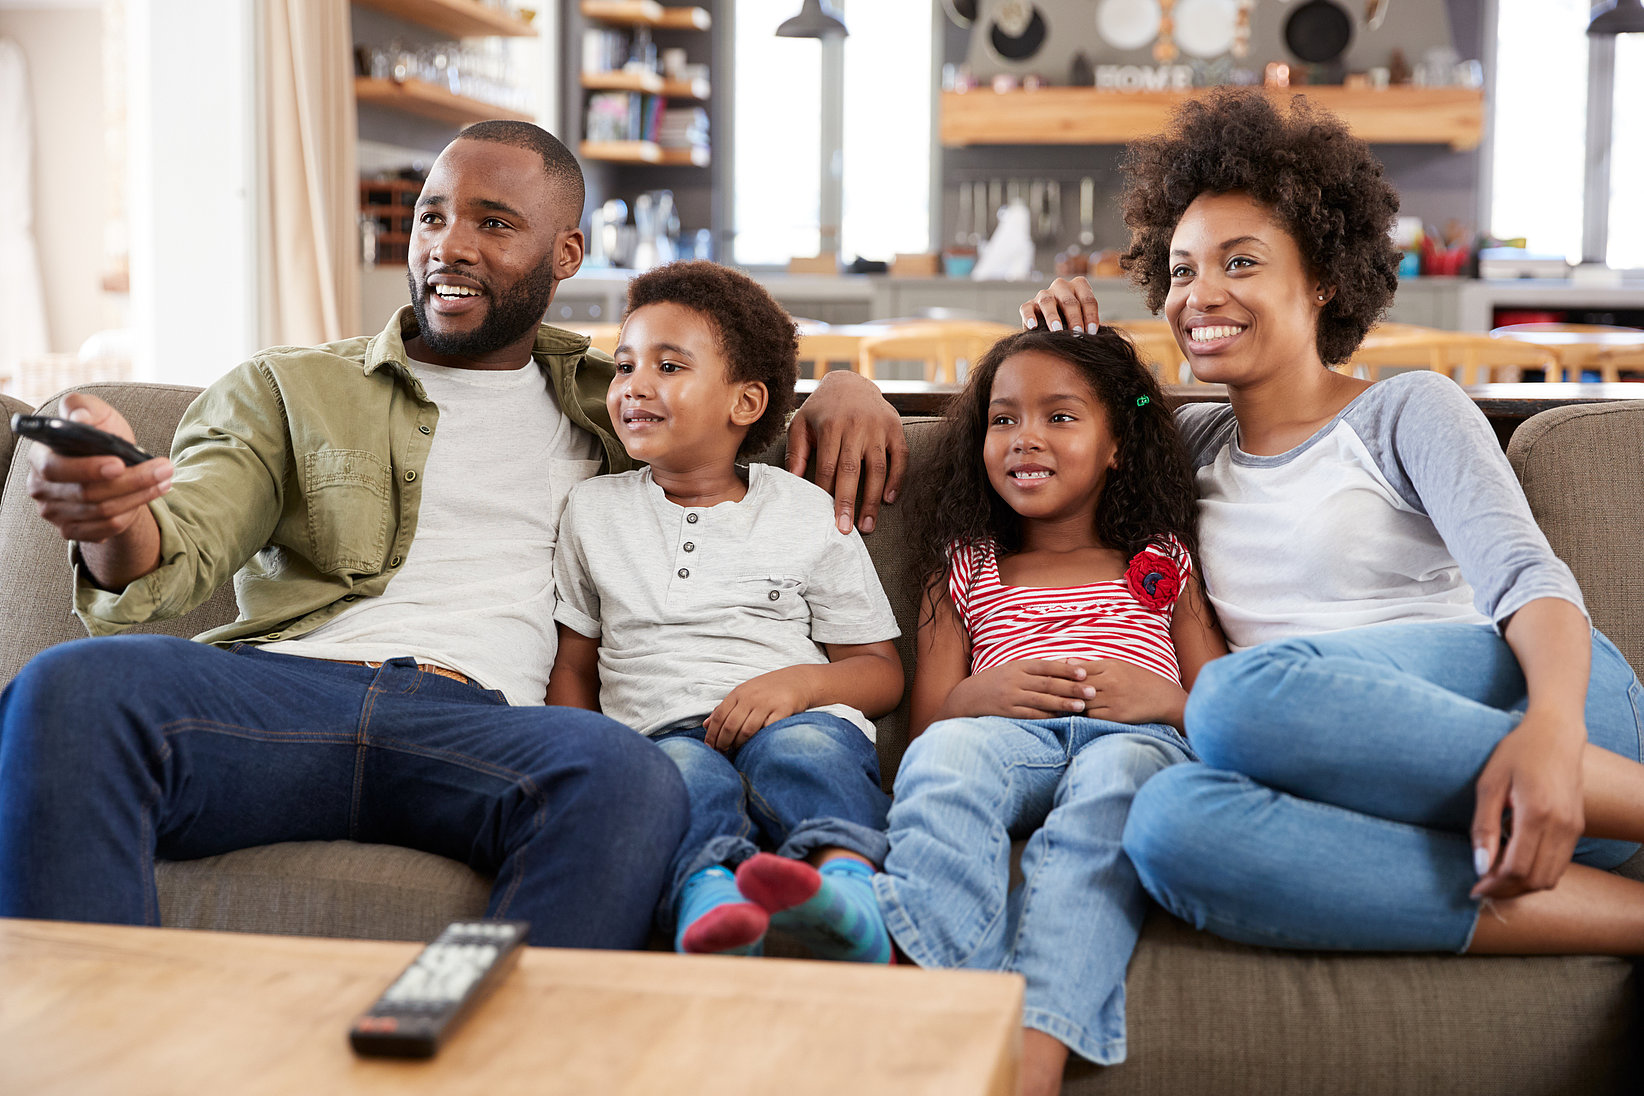 A family with two children watches TV on the couch and smiles.